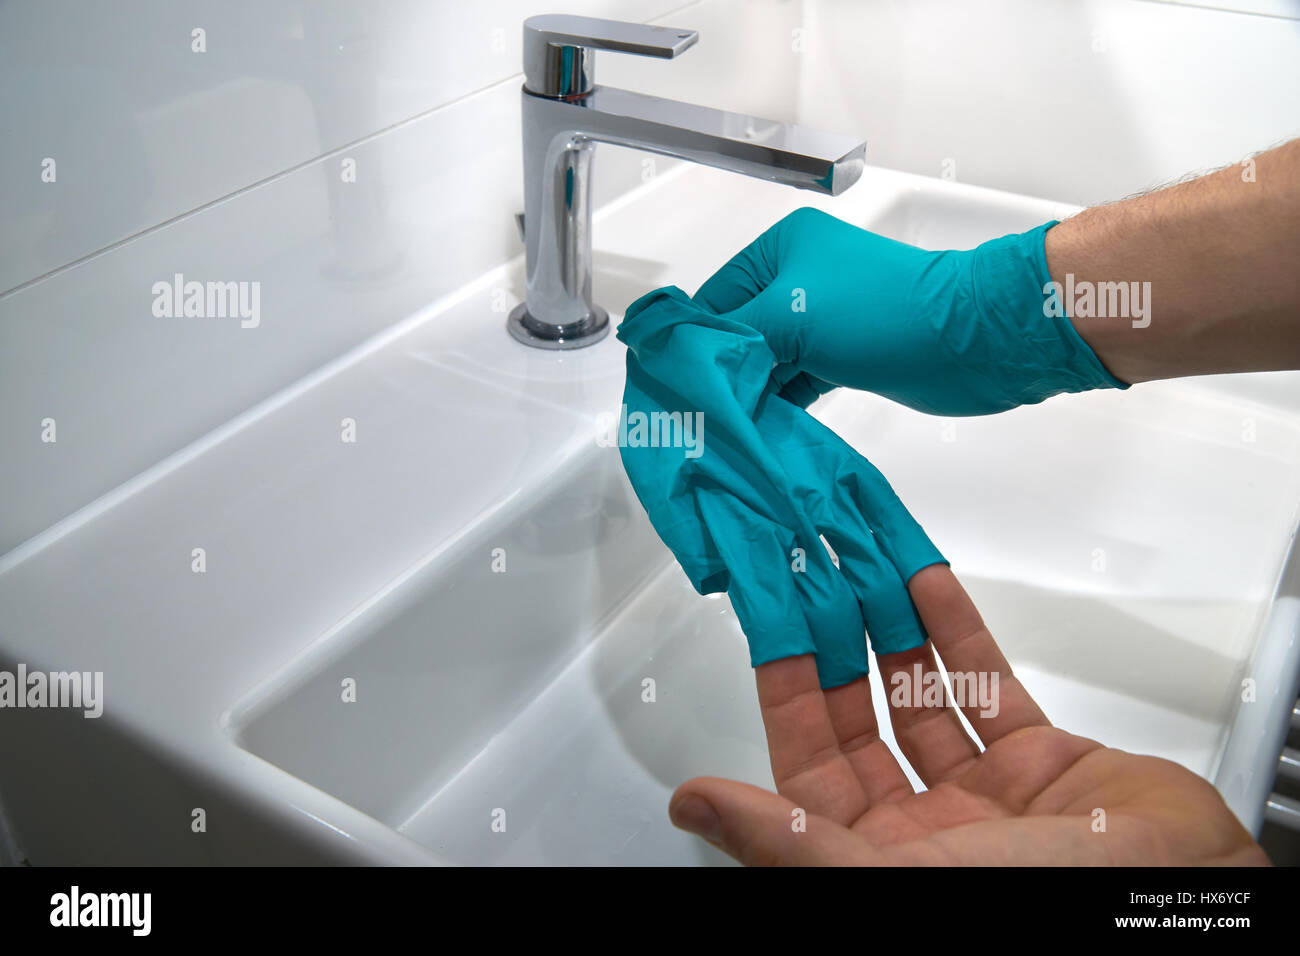 taking of medical gloves, close up Stock Photo